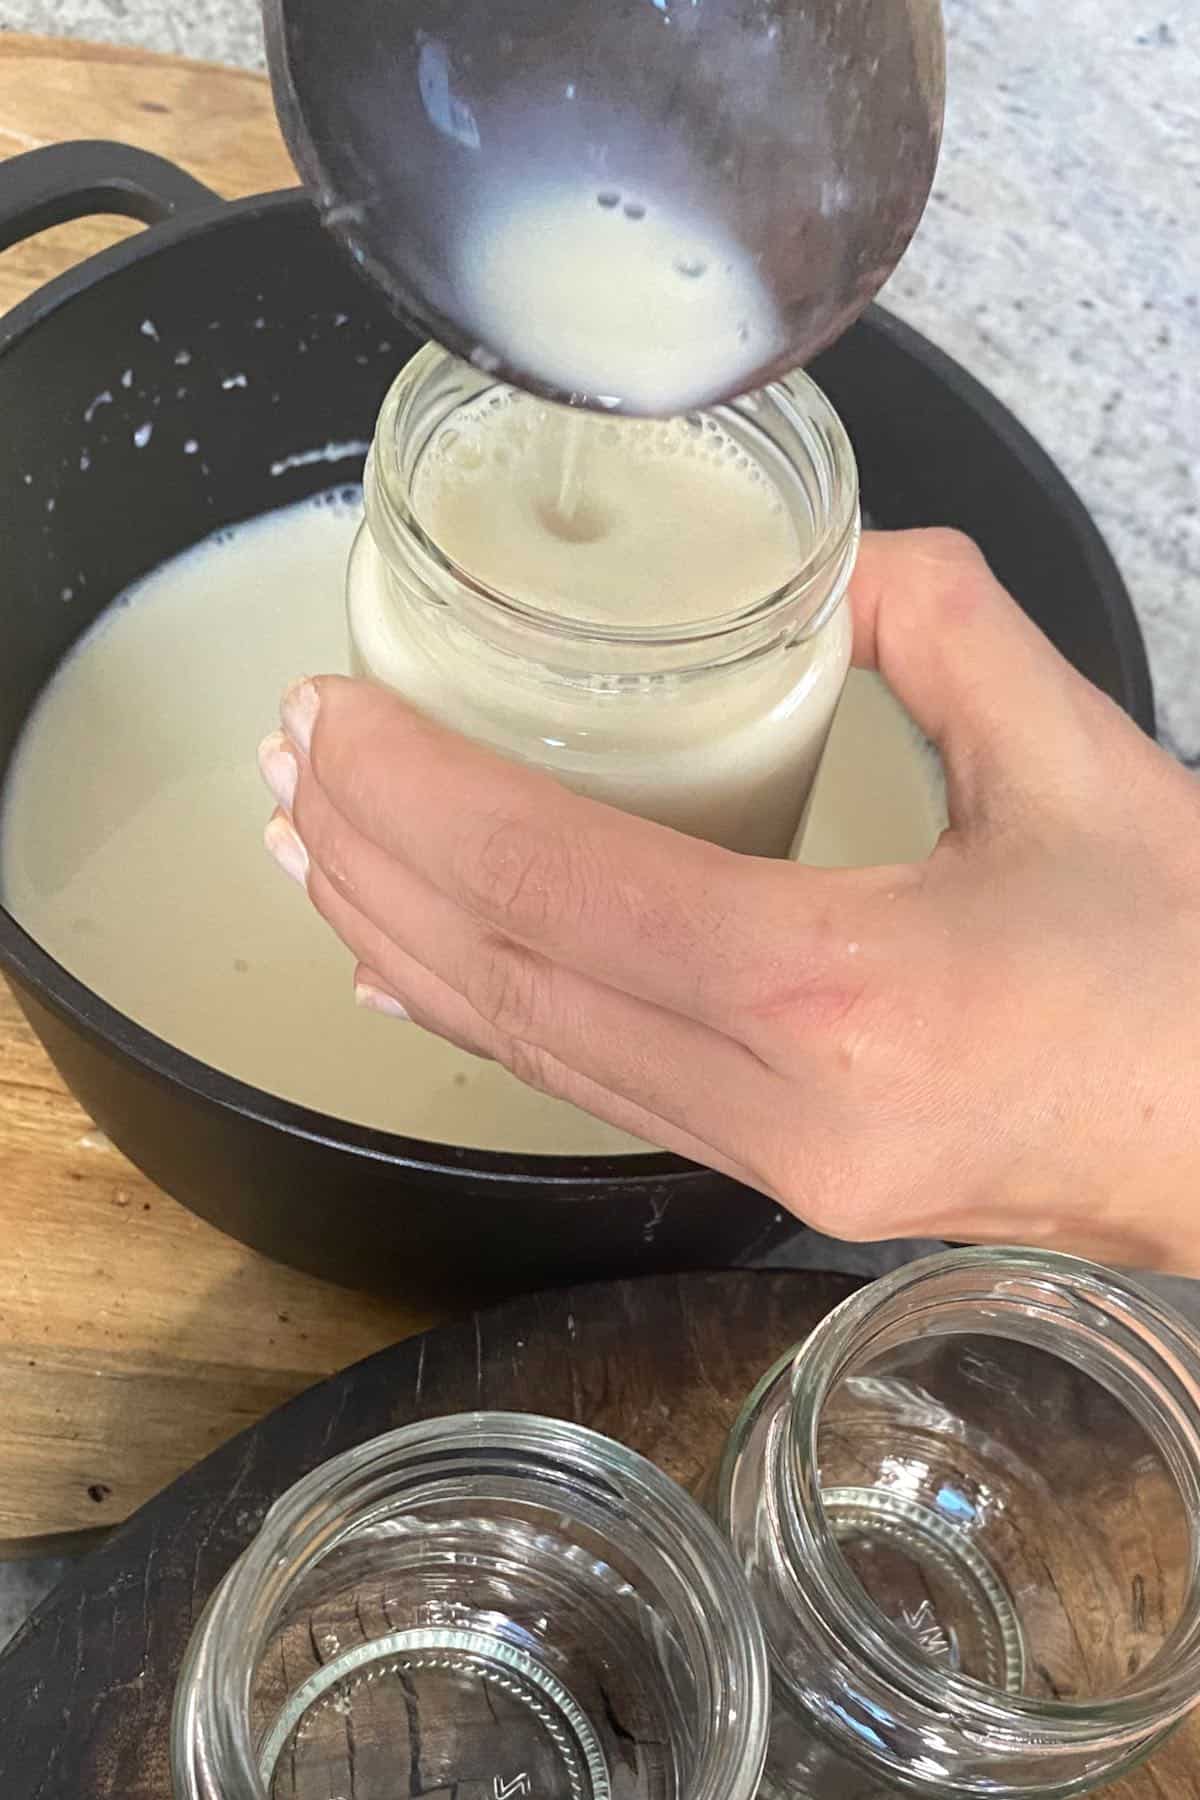 Filling up little jars with soy milk